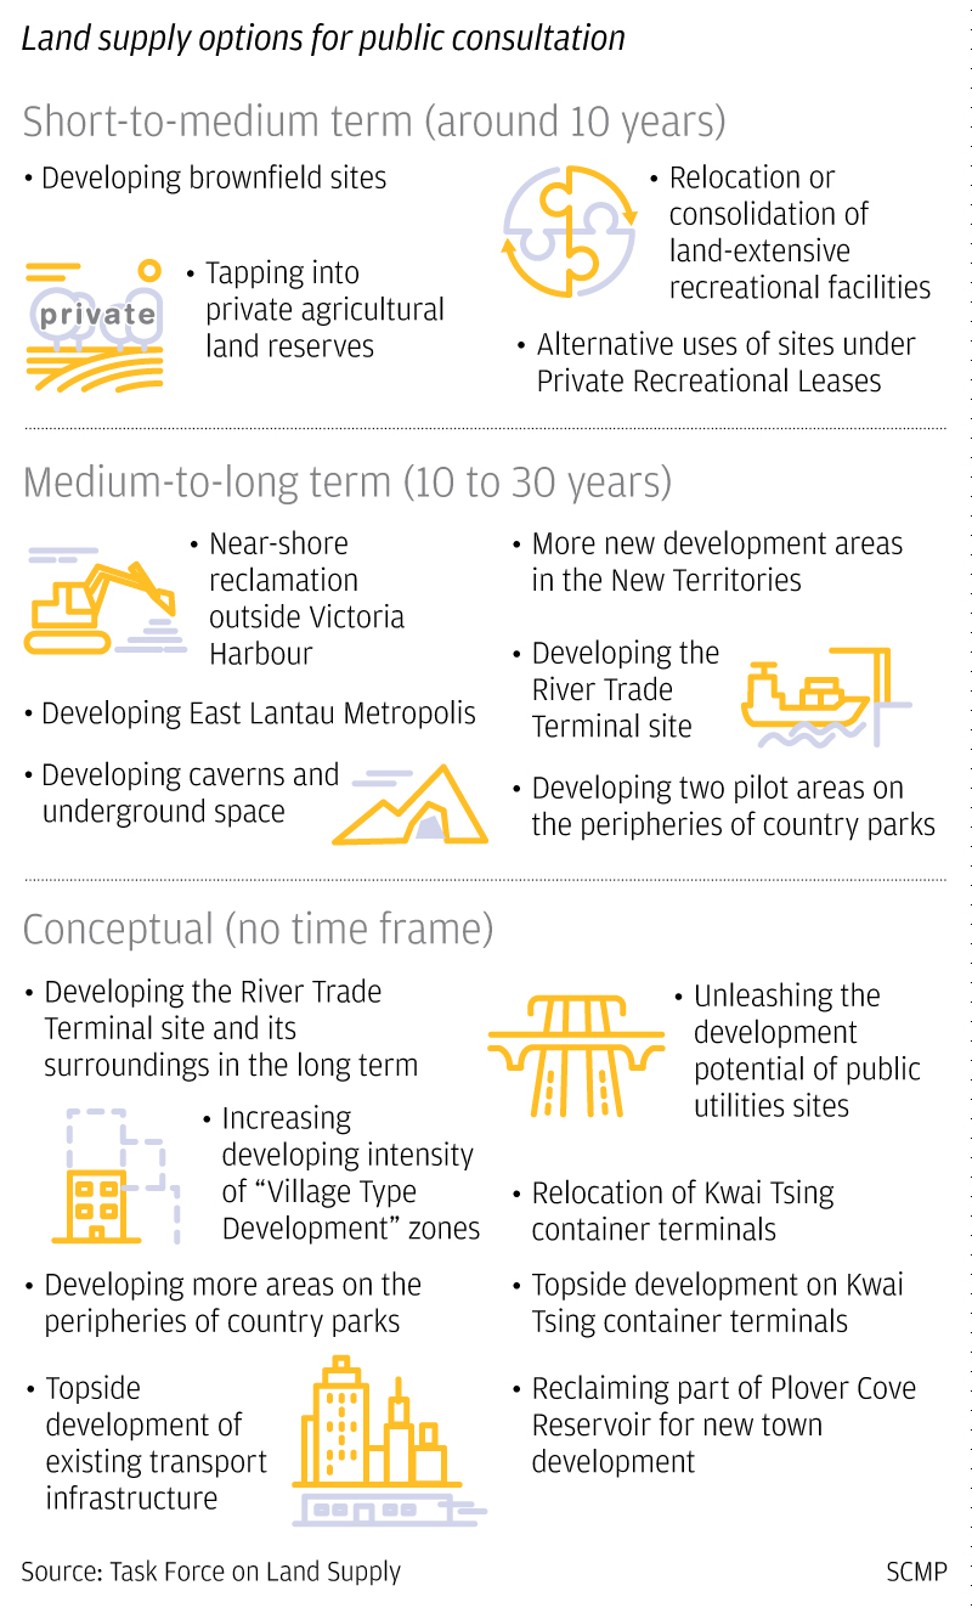 The land supply options for public consultation